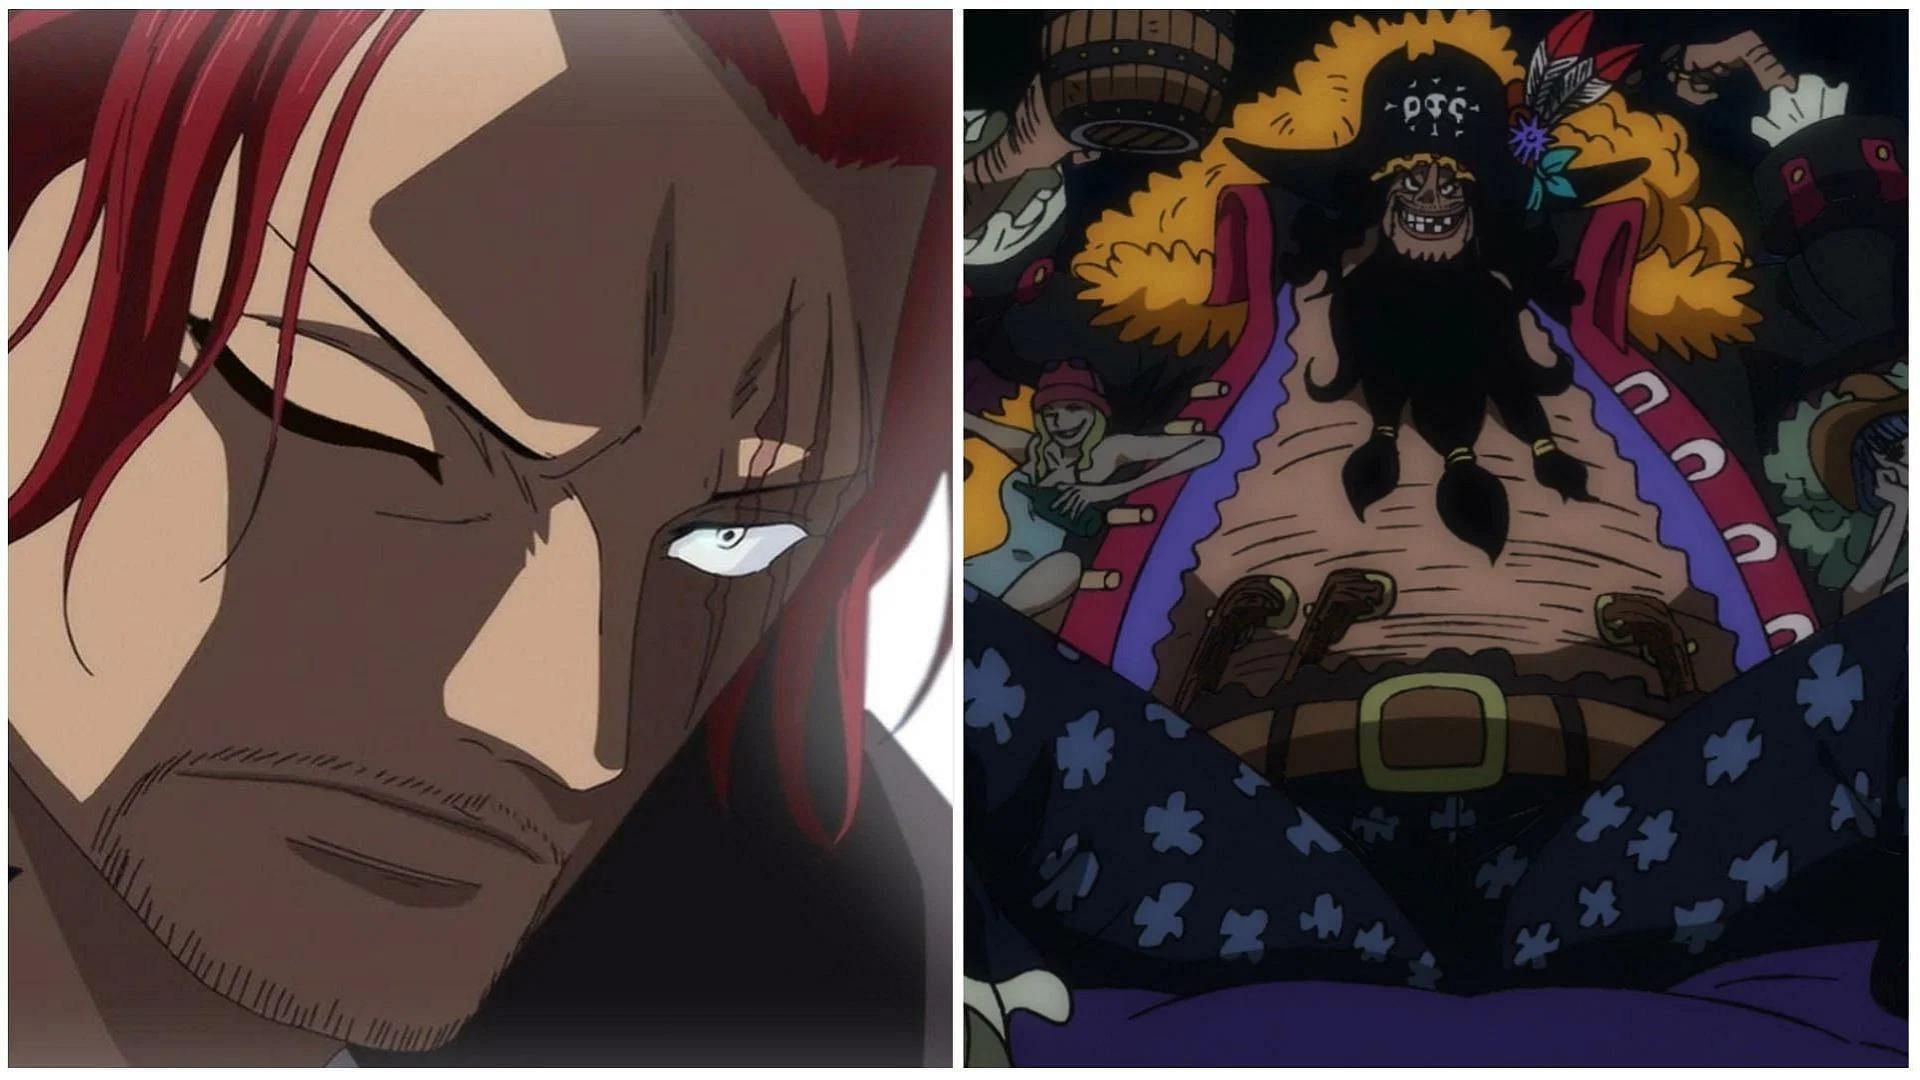 Shanks may have confirmed One Piece